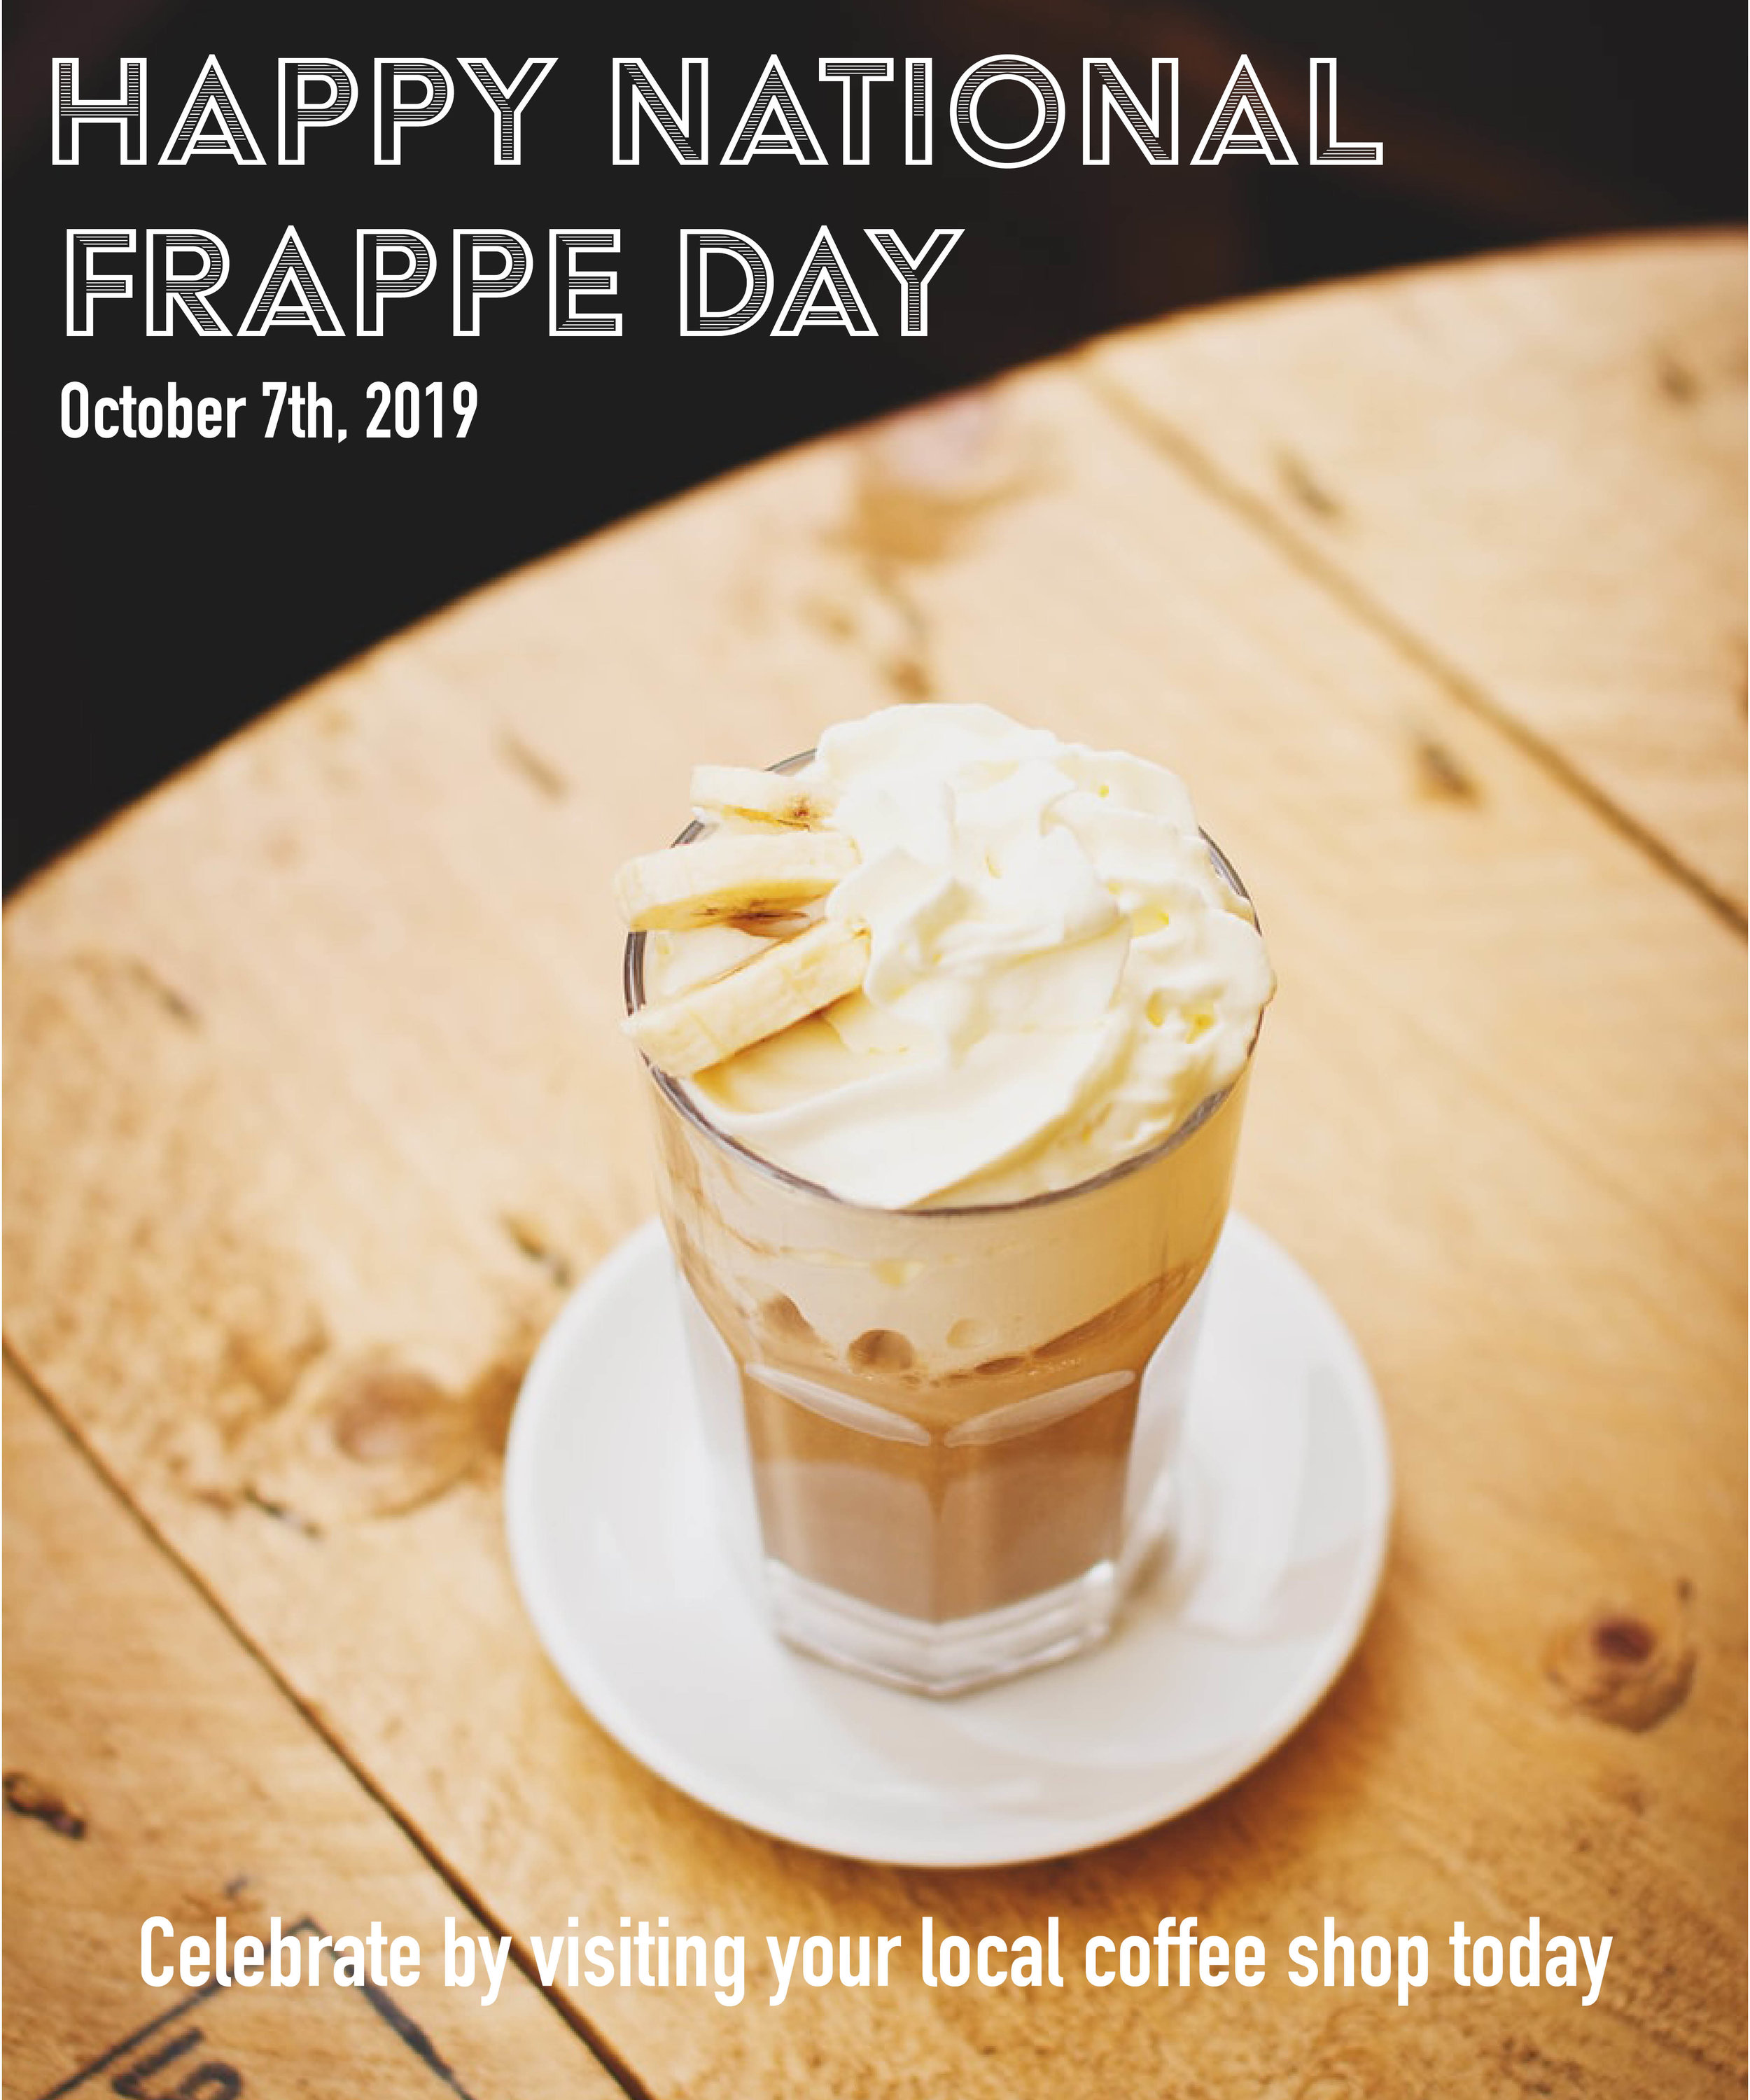 Oct. 7th, 2019, is National Frappe Day. Frappes are a cold, flavorful drink with multiple different combinations. It is usually blended with coffee or fruits. Lets celebrate #NationalFrappeDay and visit a coffee shop today.